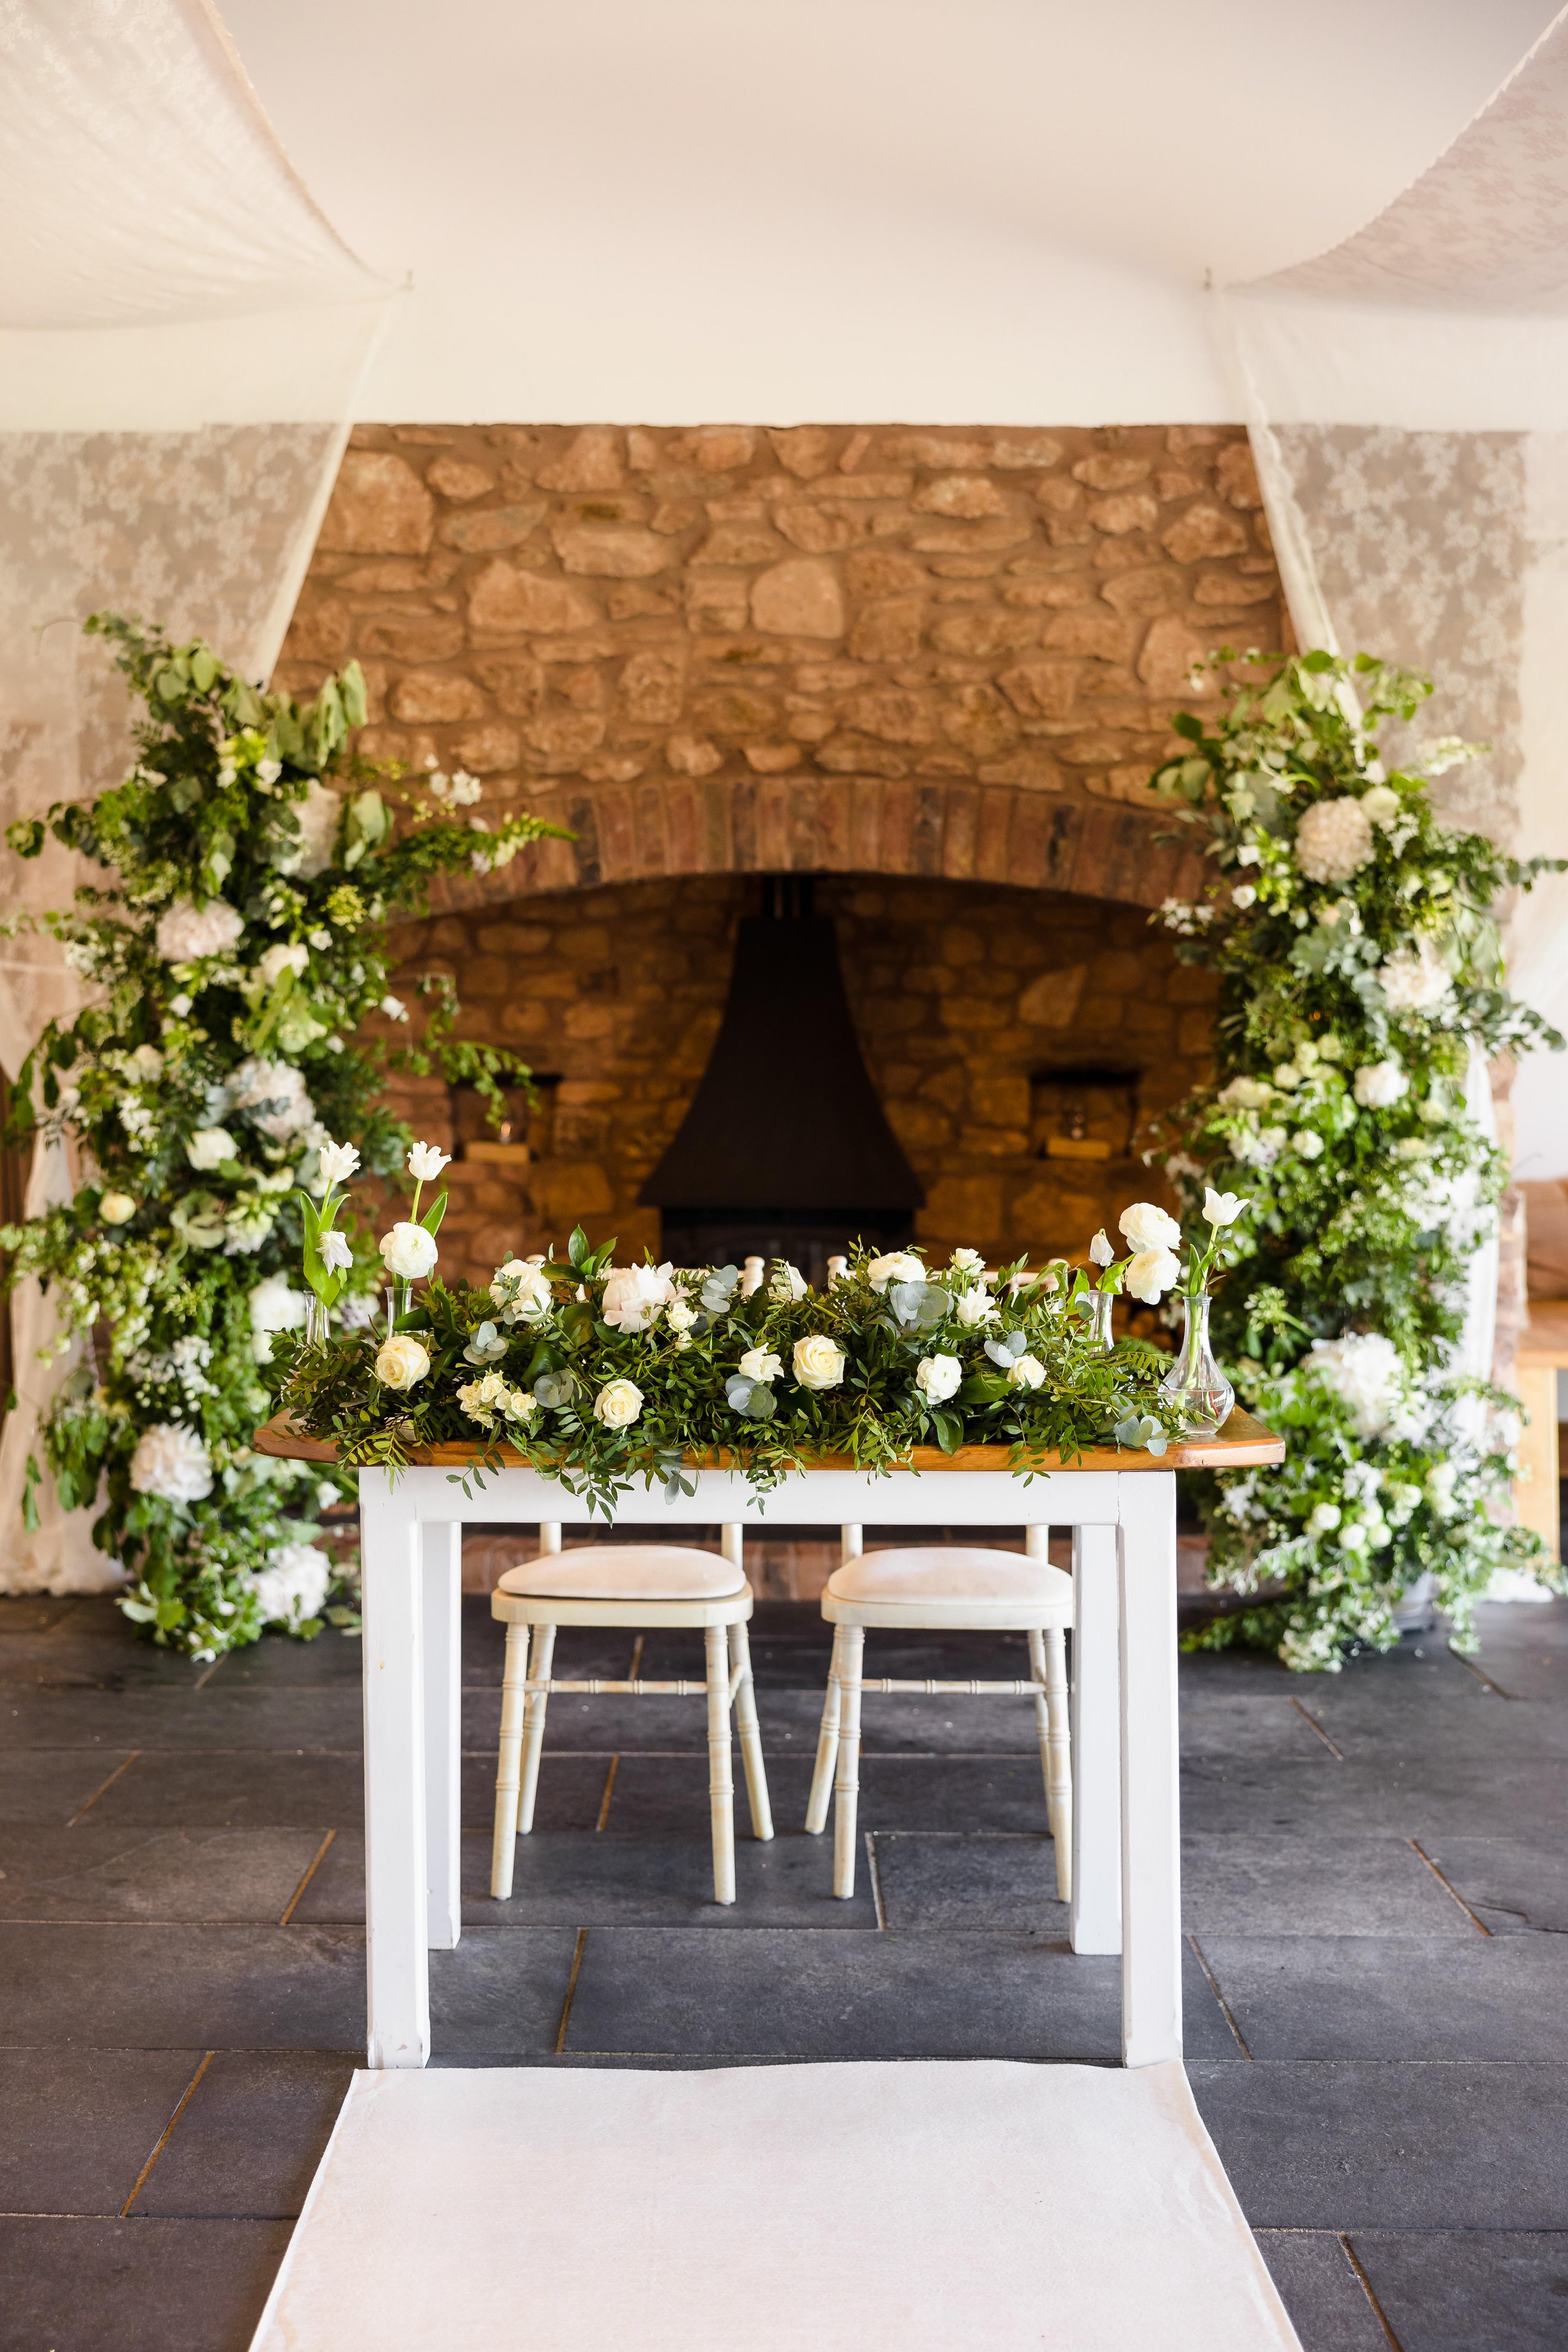  A bespoke, modern, wedding floral installation. The stylish wedding installation is placed either side of a brick fireplace and uses large headed white florals and greenery. The same flowers and foliage are used across the front of the top table lai